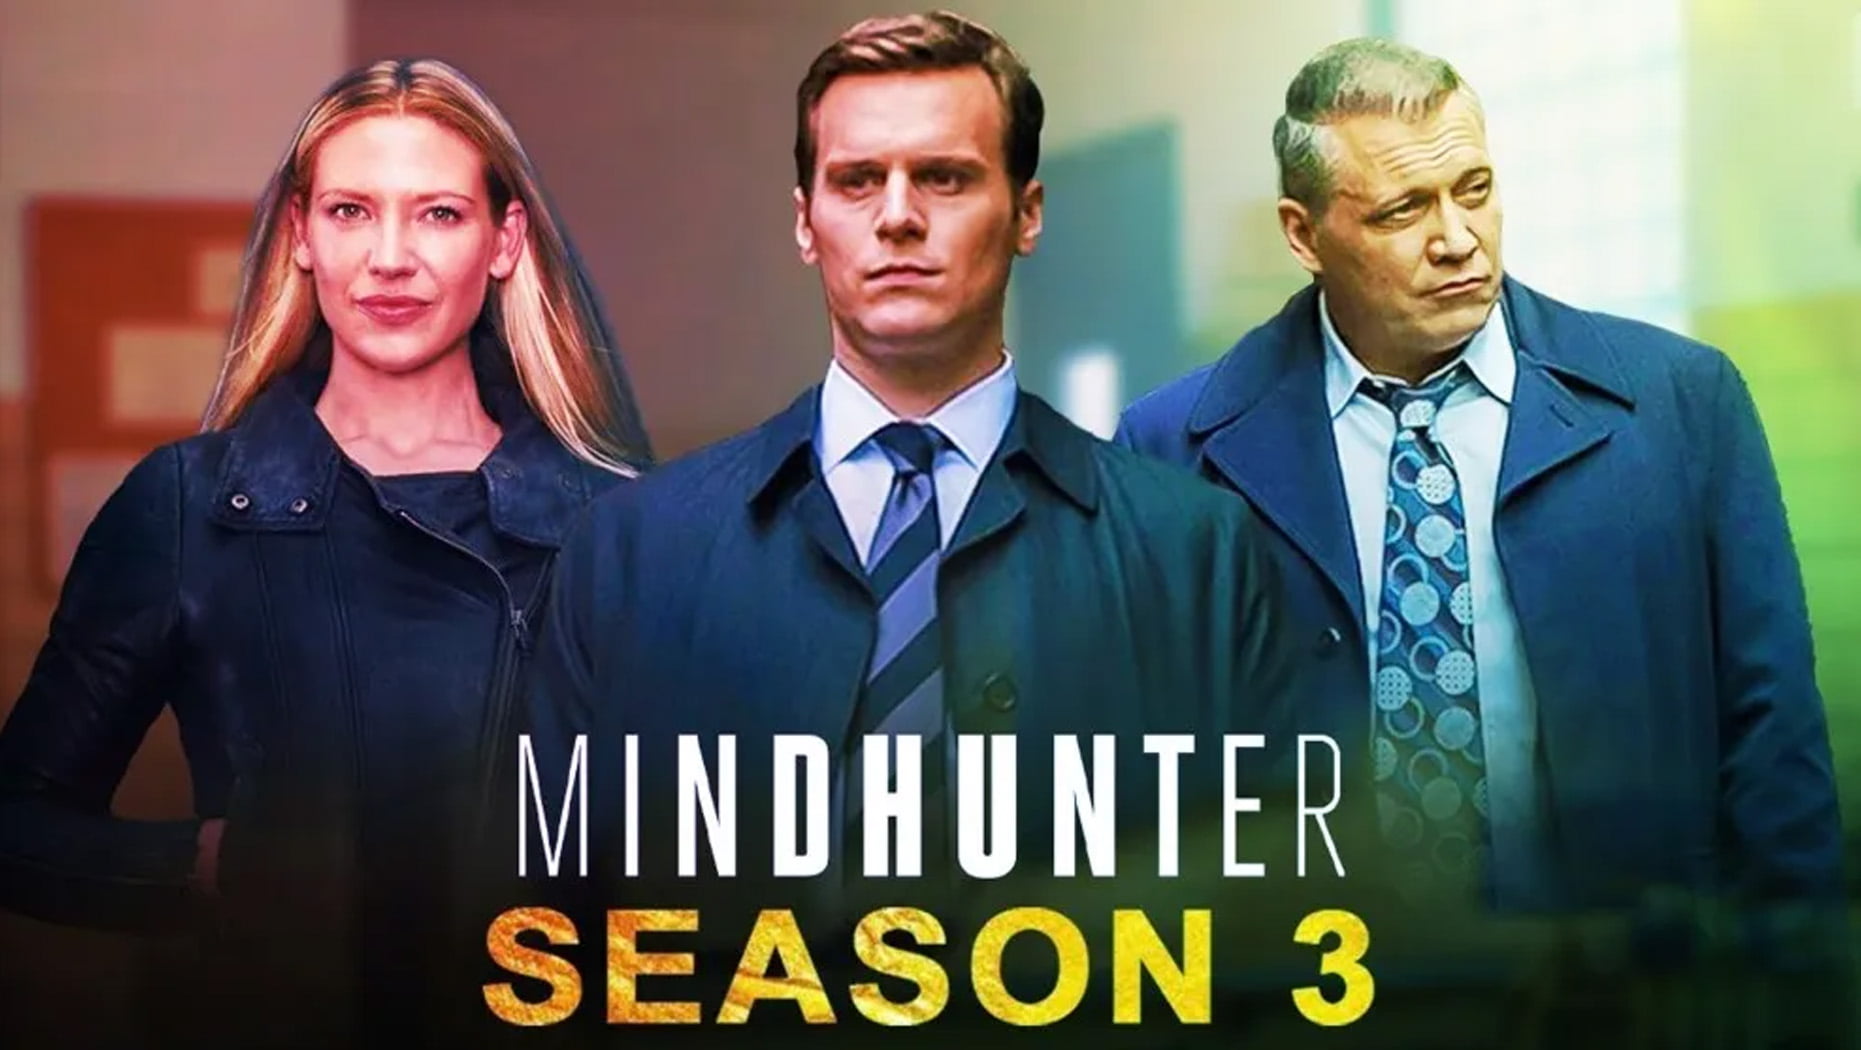 Mindhunter Season 3: All Information Related To The Third Season